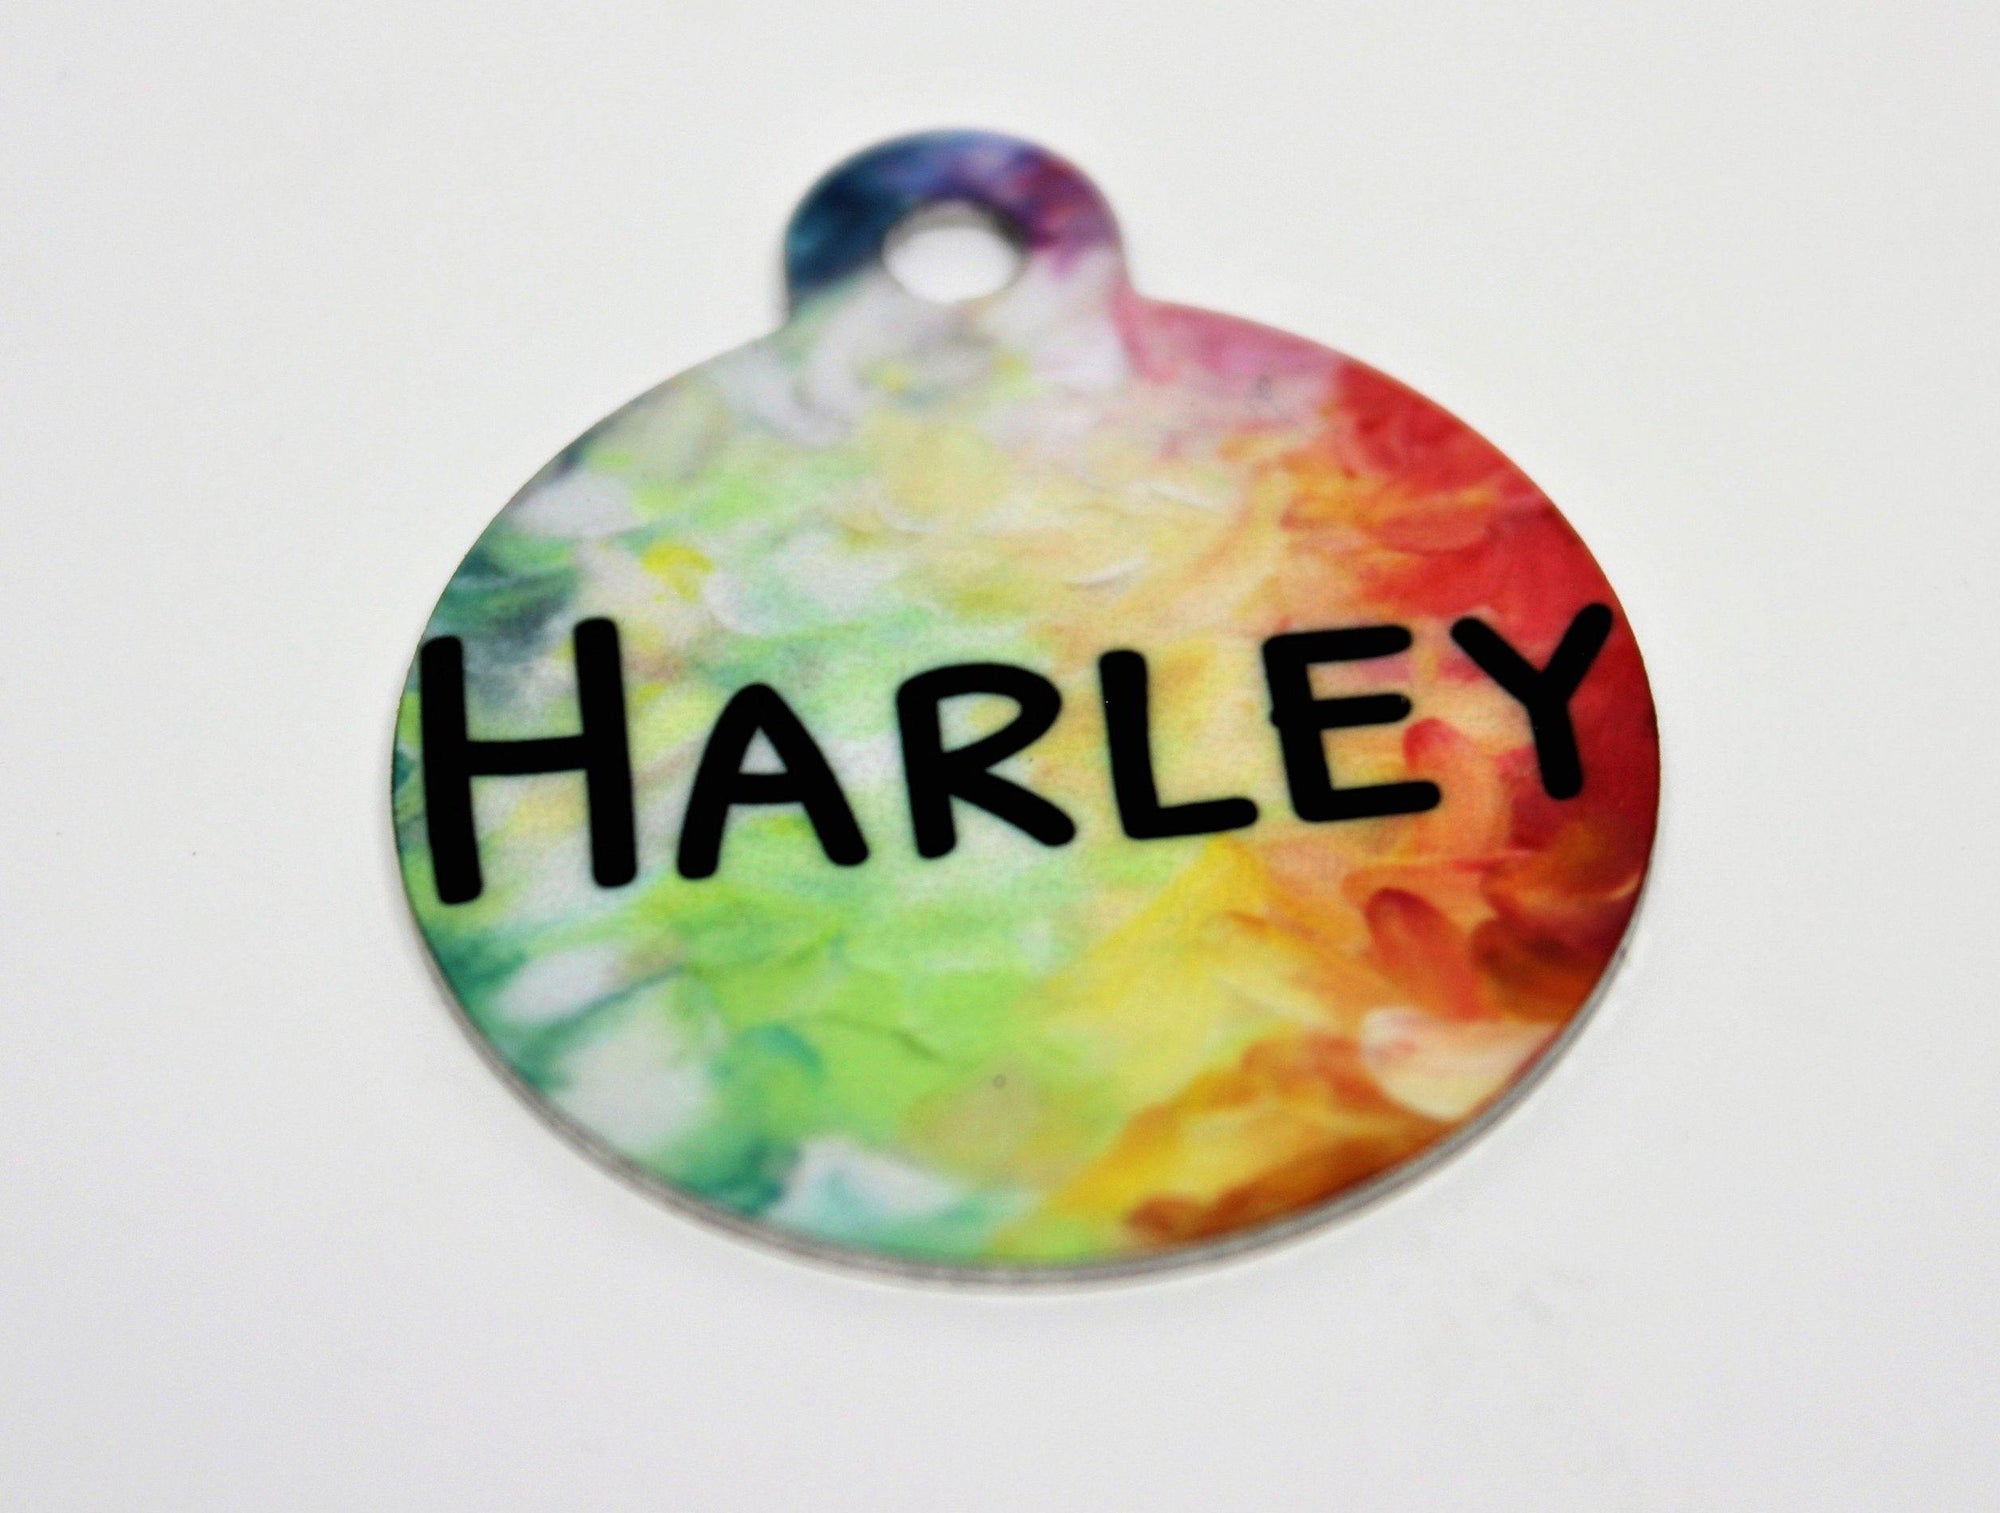 Personalized Pet Tags | Custom Pet Tags | Pet Accessories | Tie Dye - This & That Solutions - Personalized Pet Tags | Custom Pet Tags | Pet Accessories | Tie Dye - Personalized Gifts & Custom Home Decor